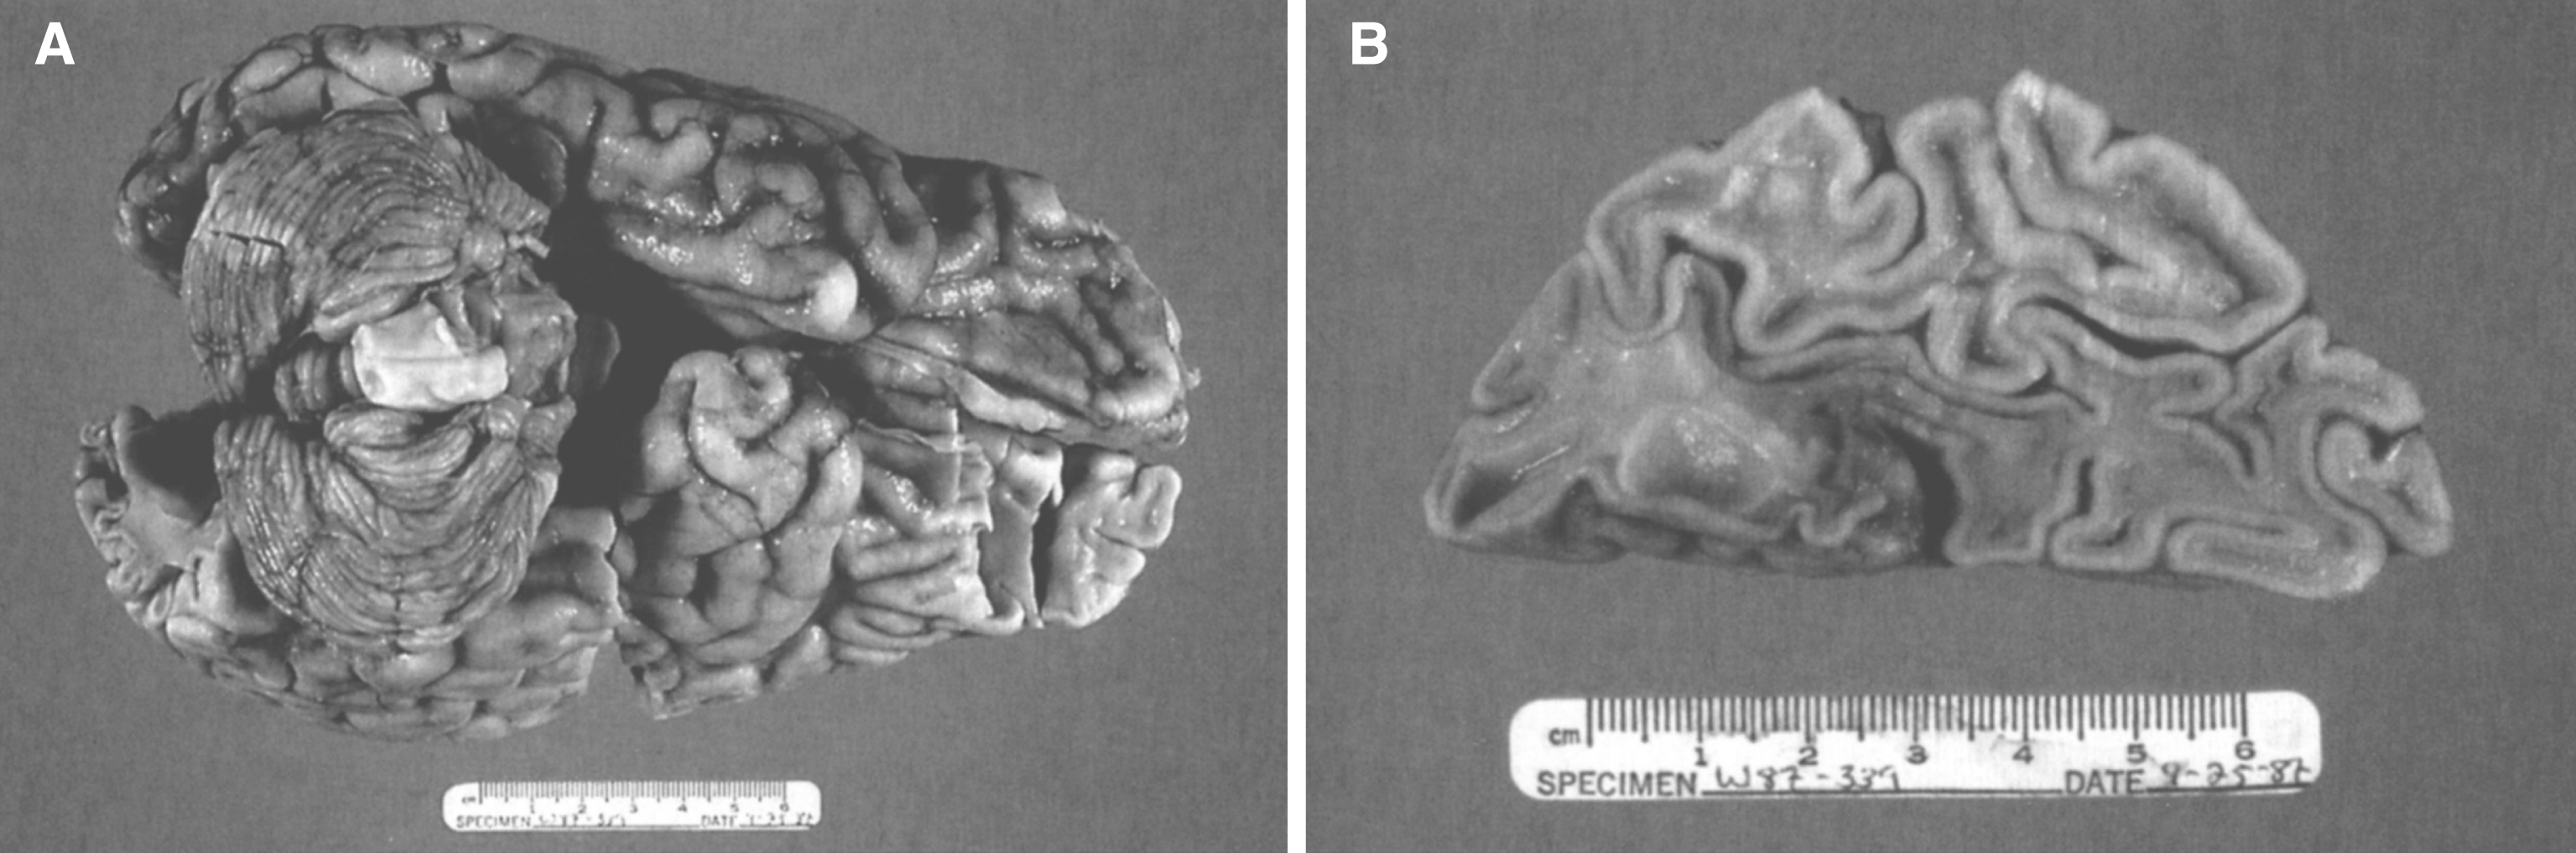 GM2 gangliosidosis type II (Sandhoff disease). (A) The brain shows atrophy of gyri. (B) On cross section, both gray and white matter are atrophic.